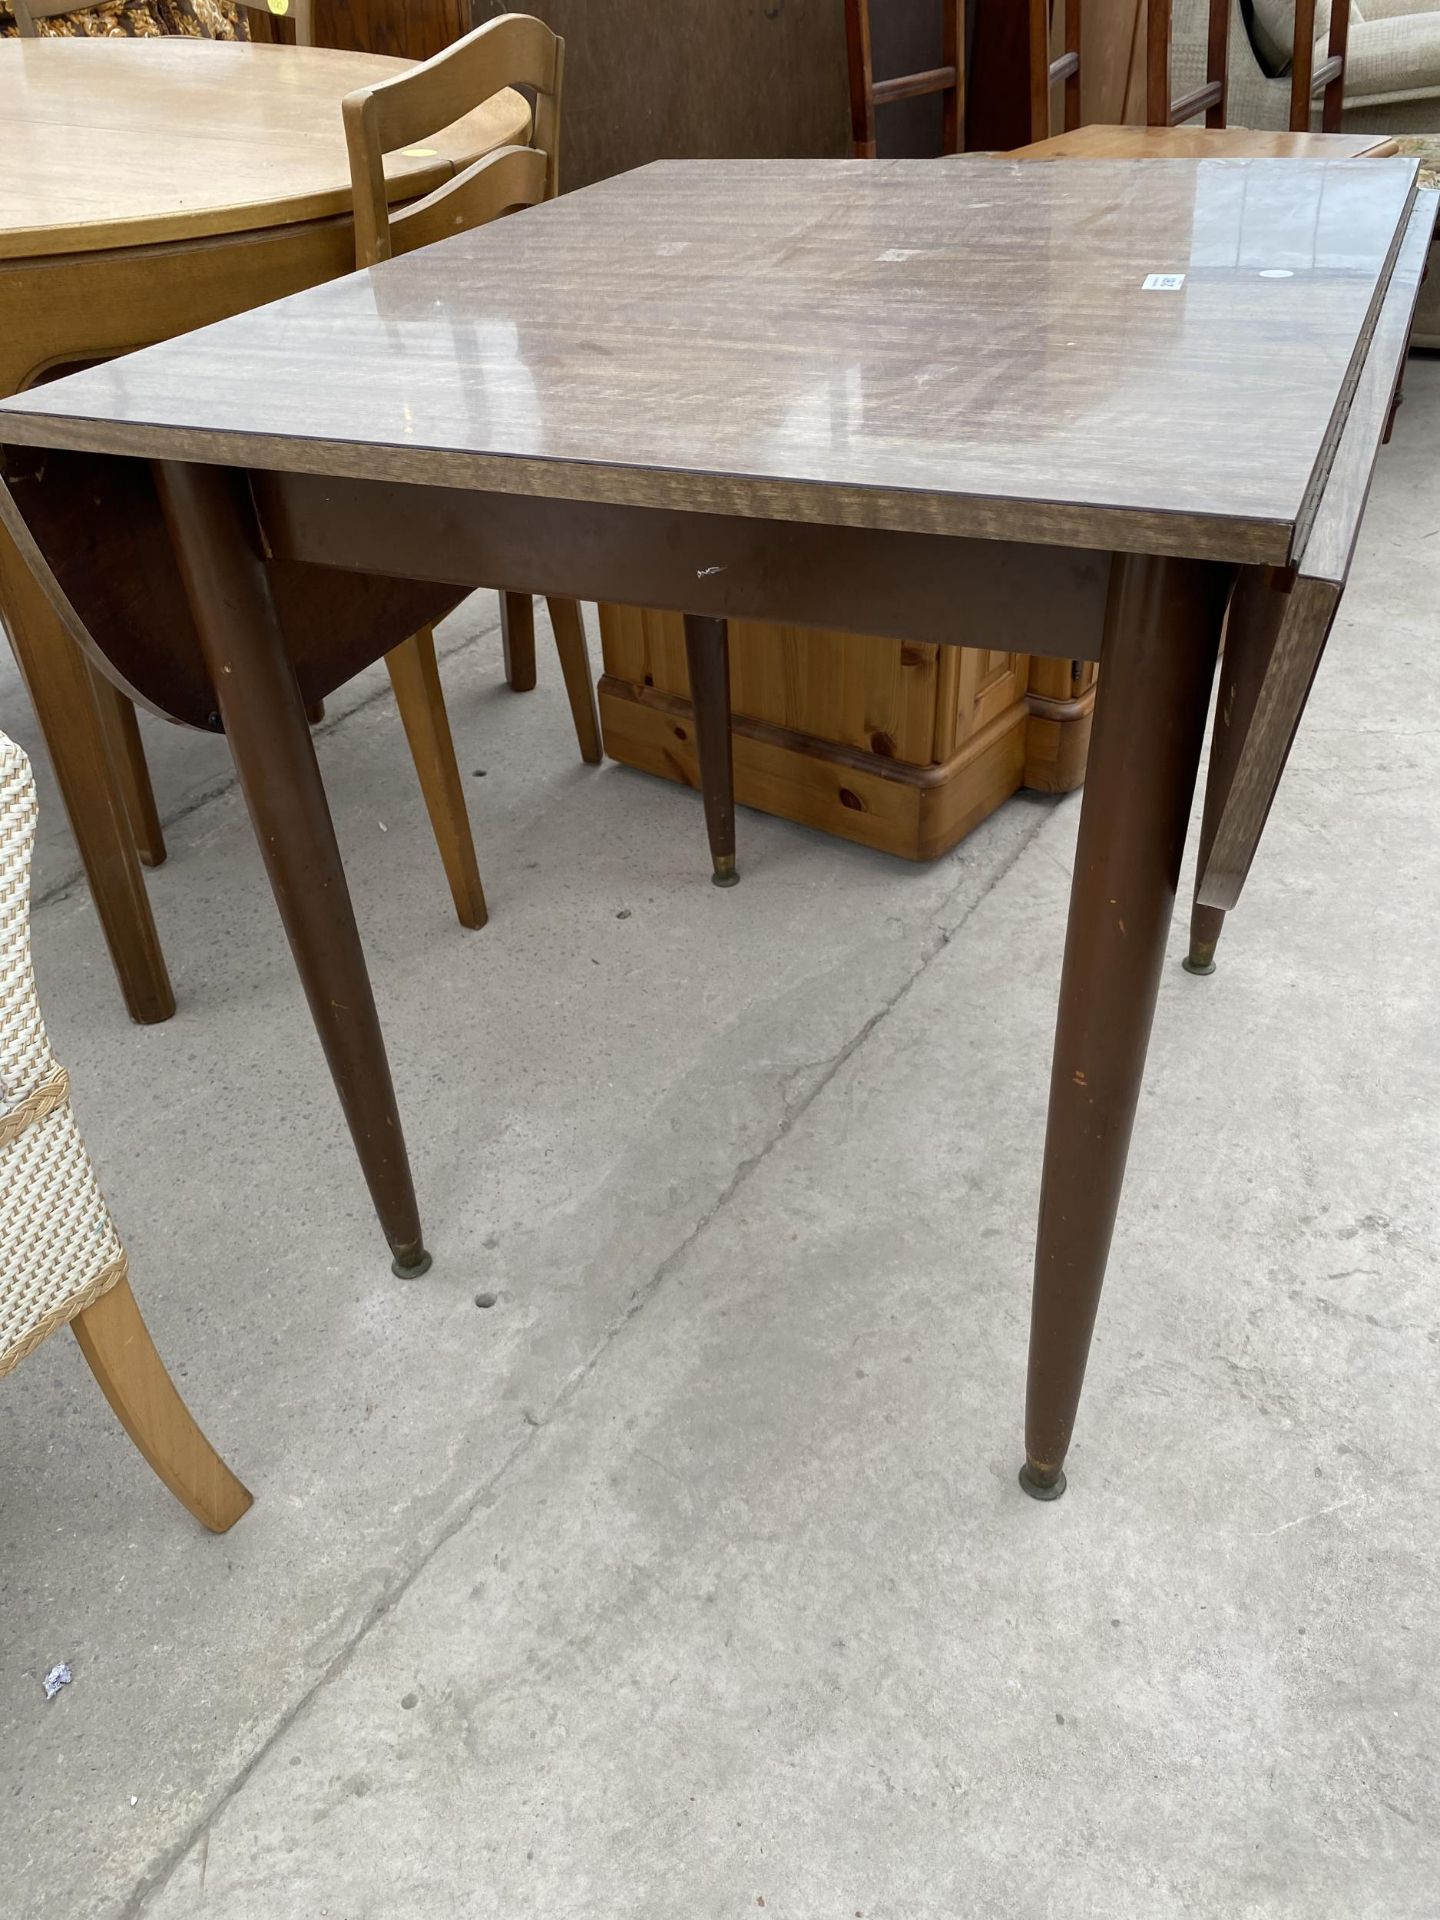 A MID 20TH CENTURY CREAMY WALNUT EFFECT DROP-LEAF DINING TABLE - Image 2 of 3